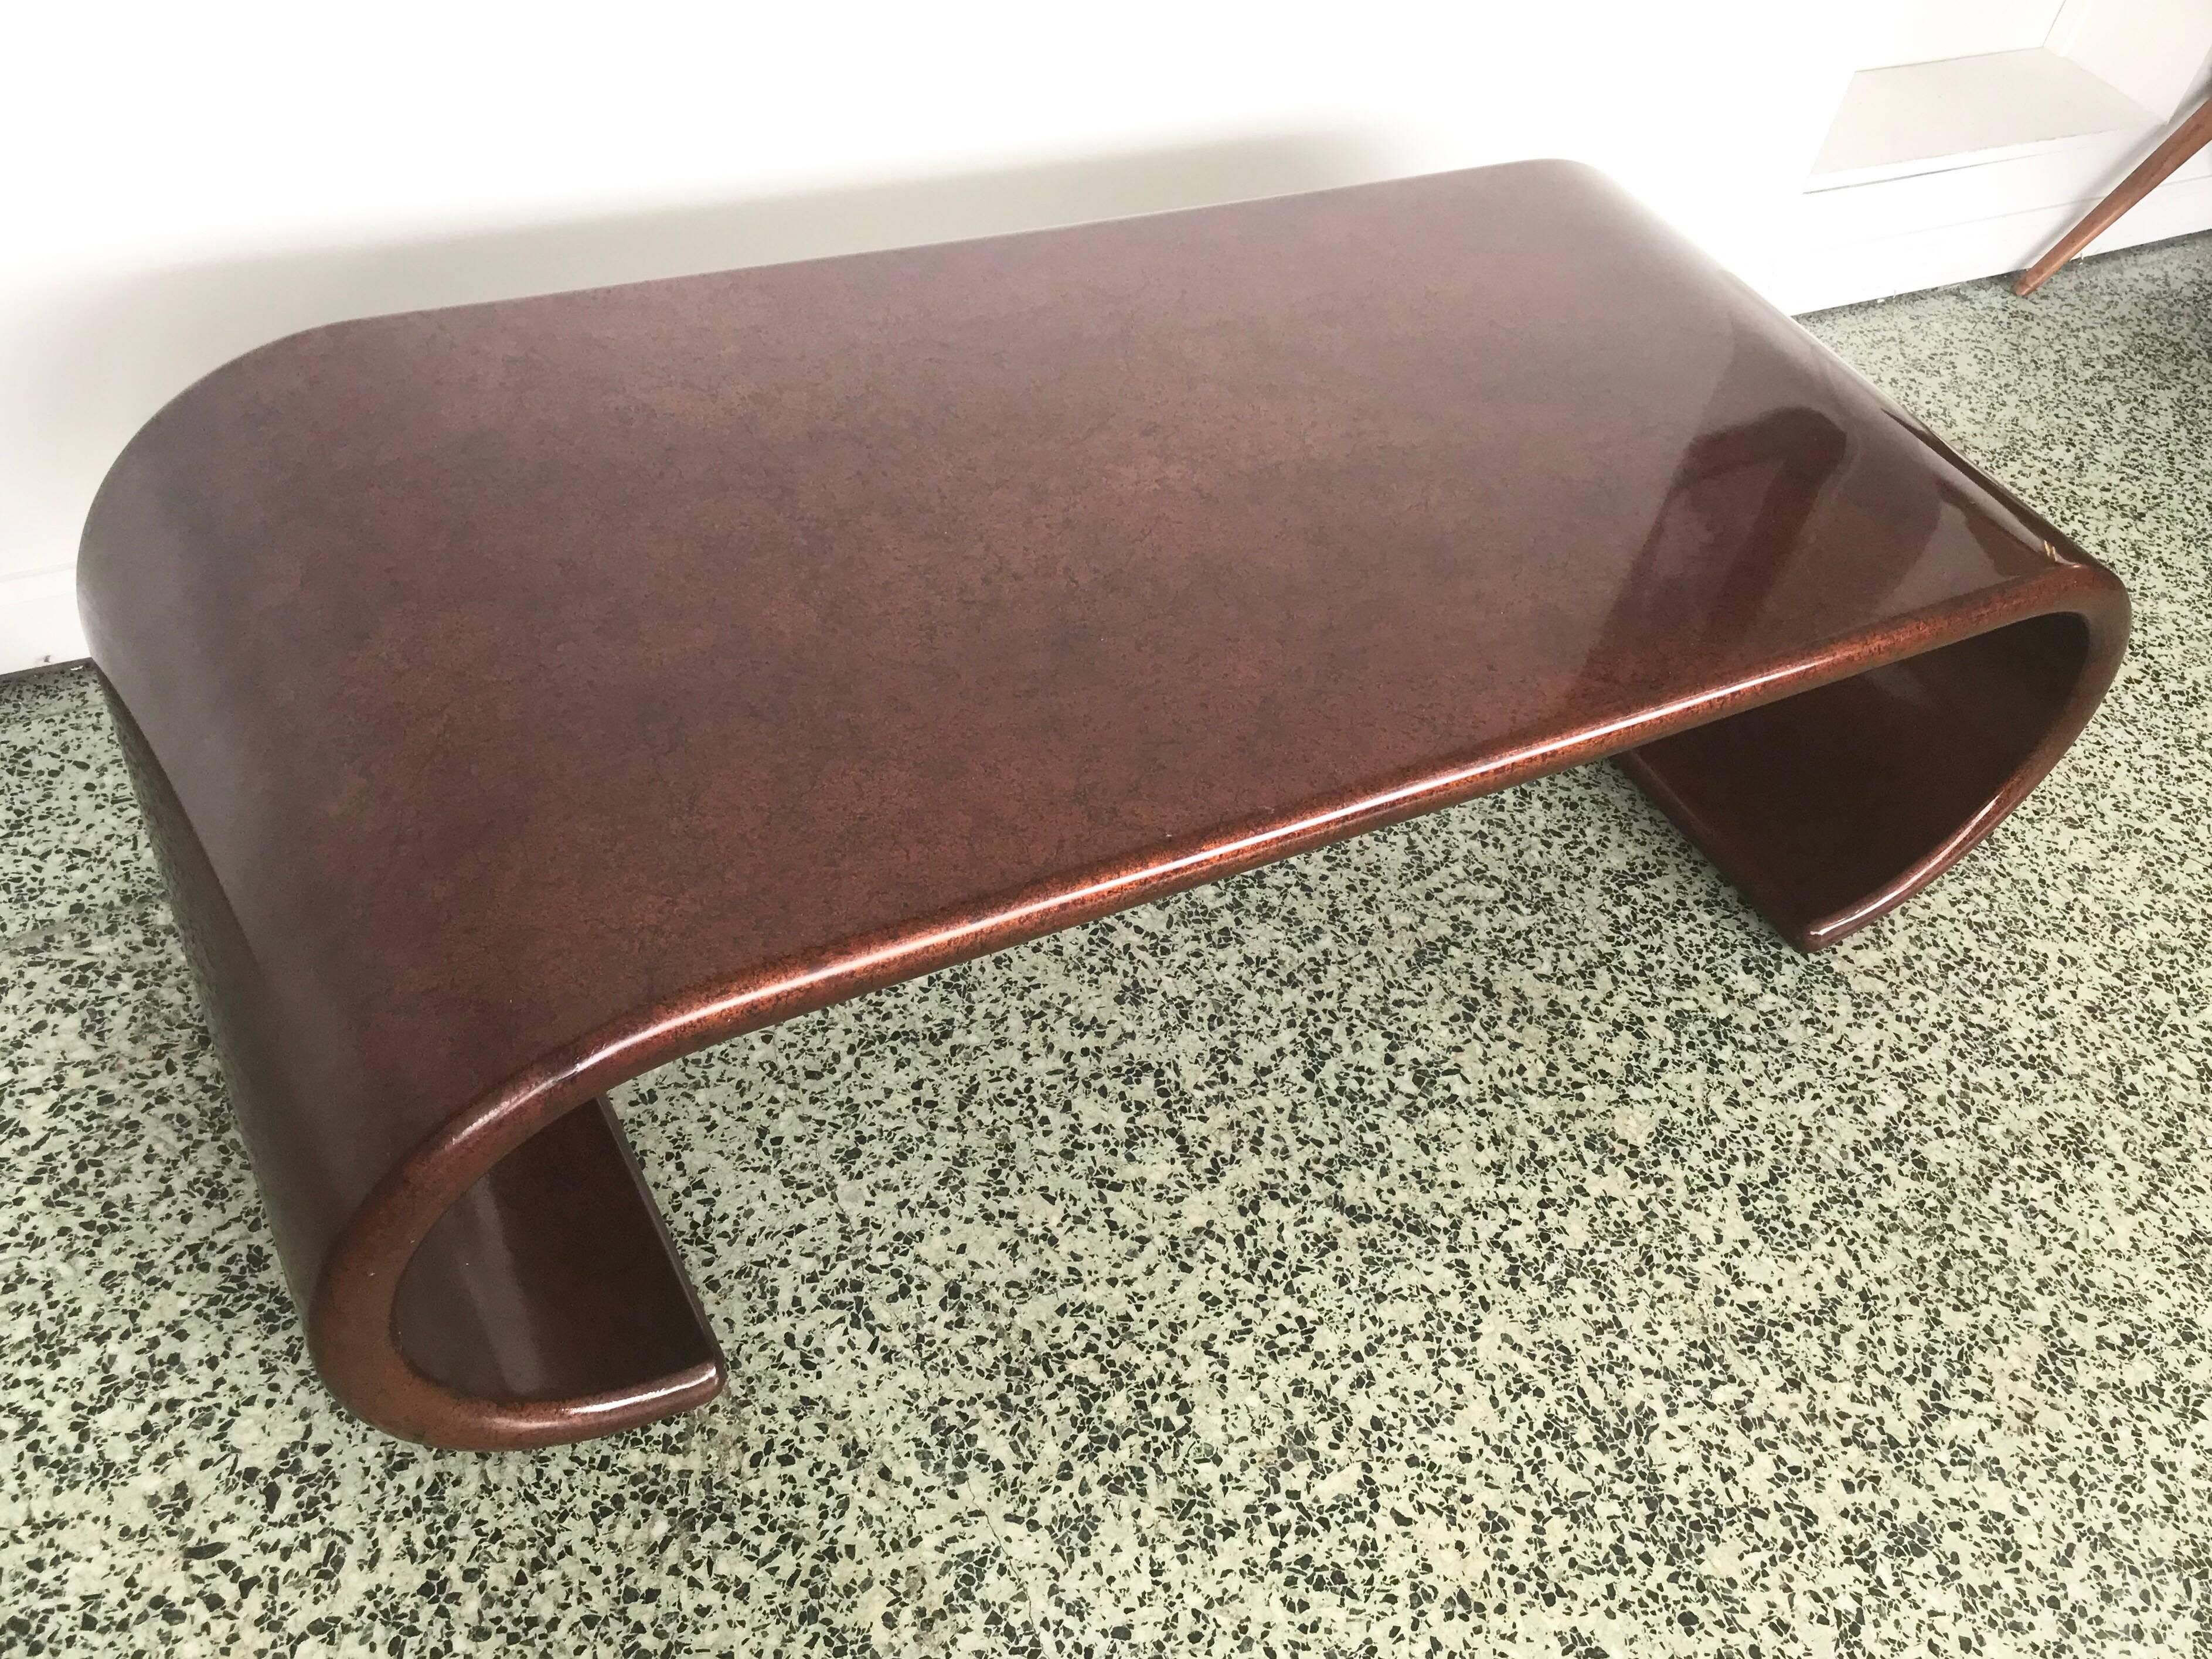 Designer: Baker
Manufacturer: Baker
Period/style: Mid-Century Modern
Country: USA
Date: 1950s.

Recently lightly refinished.